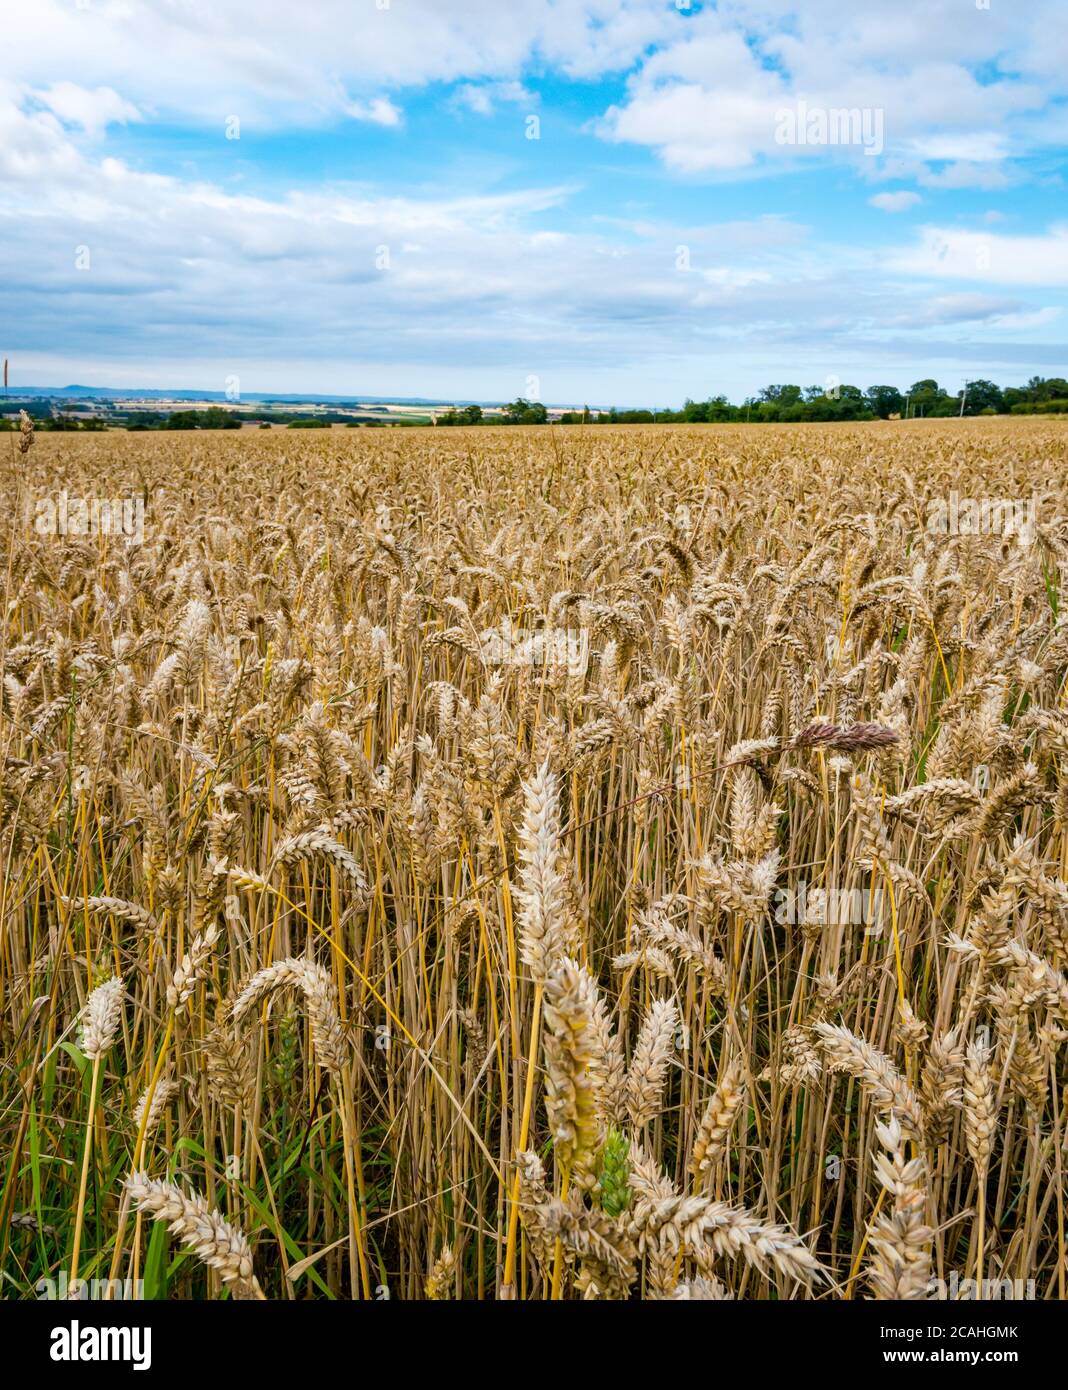 Agricultural Summer landscape with wheat cereal crop growing in a field, East Lothian, Scotland, UK Stock Photo